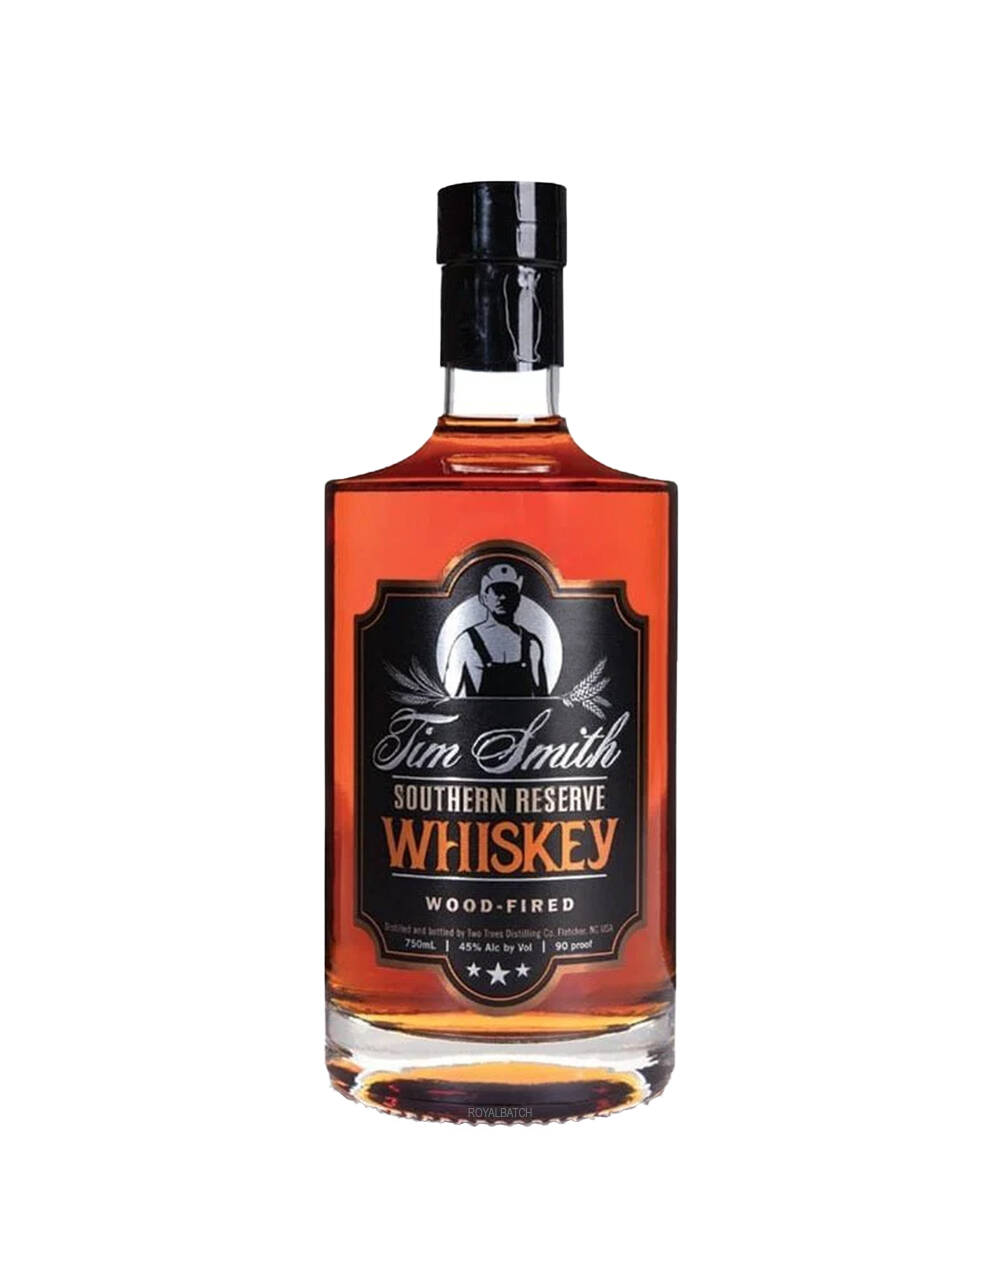 Tim Smith Southern Reserve Wood Fired Whiskey